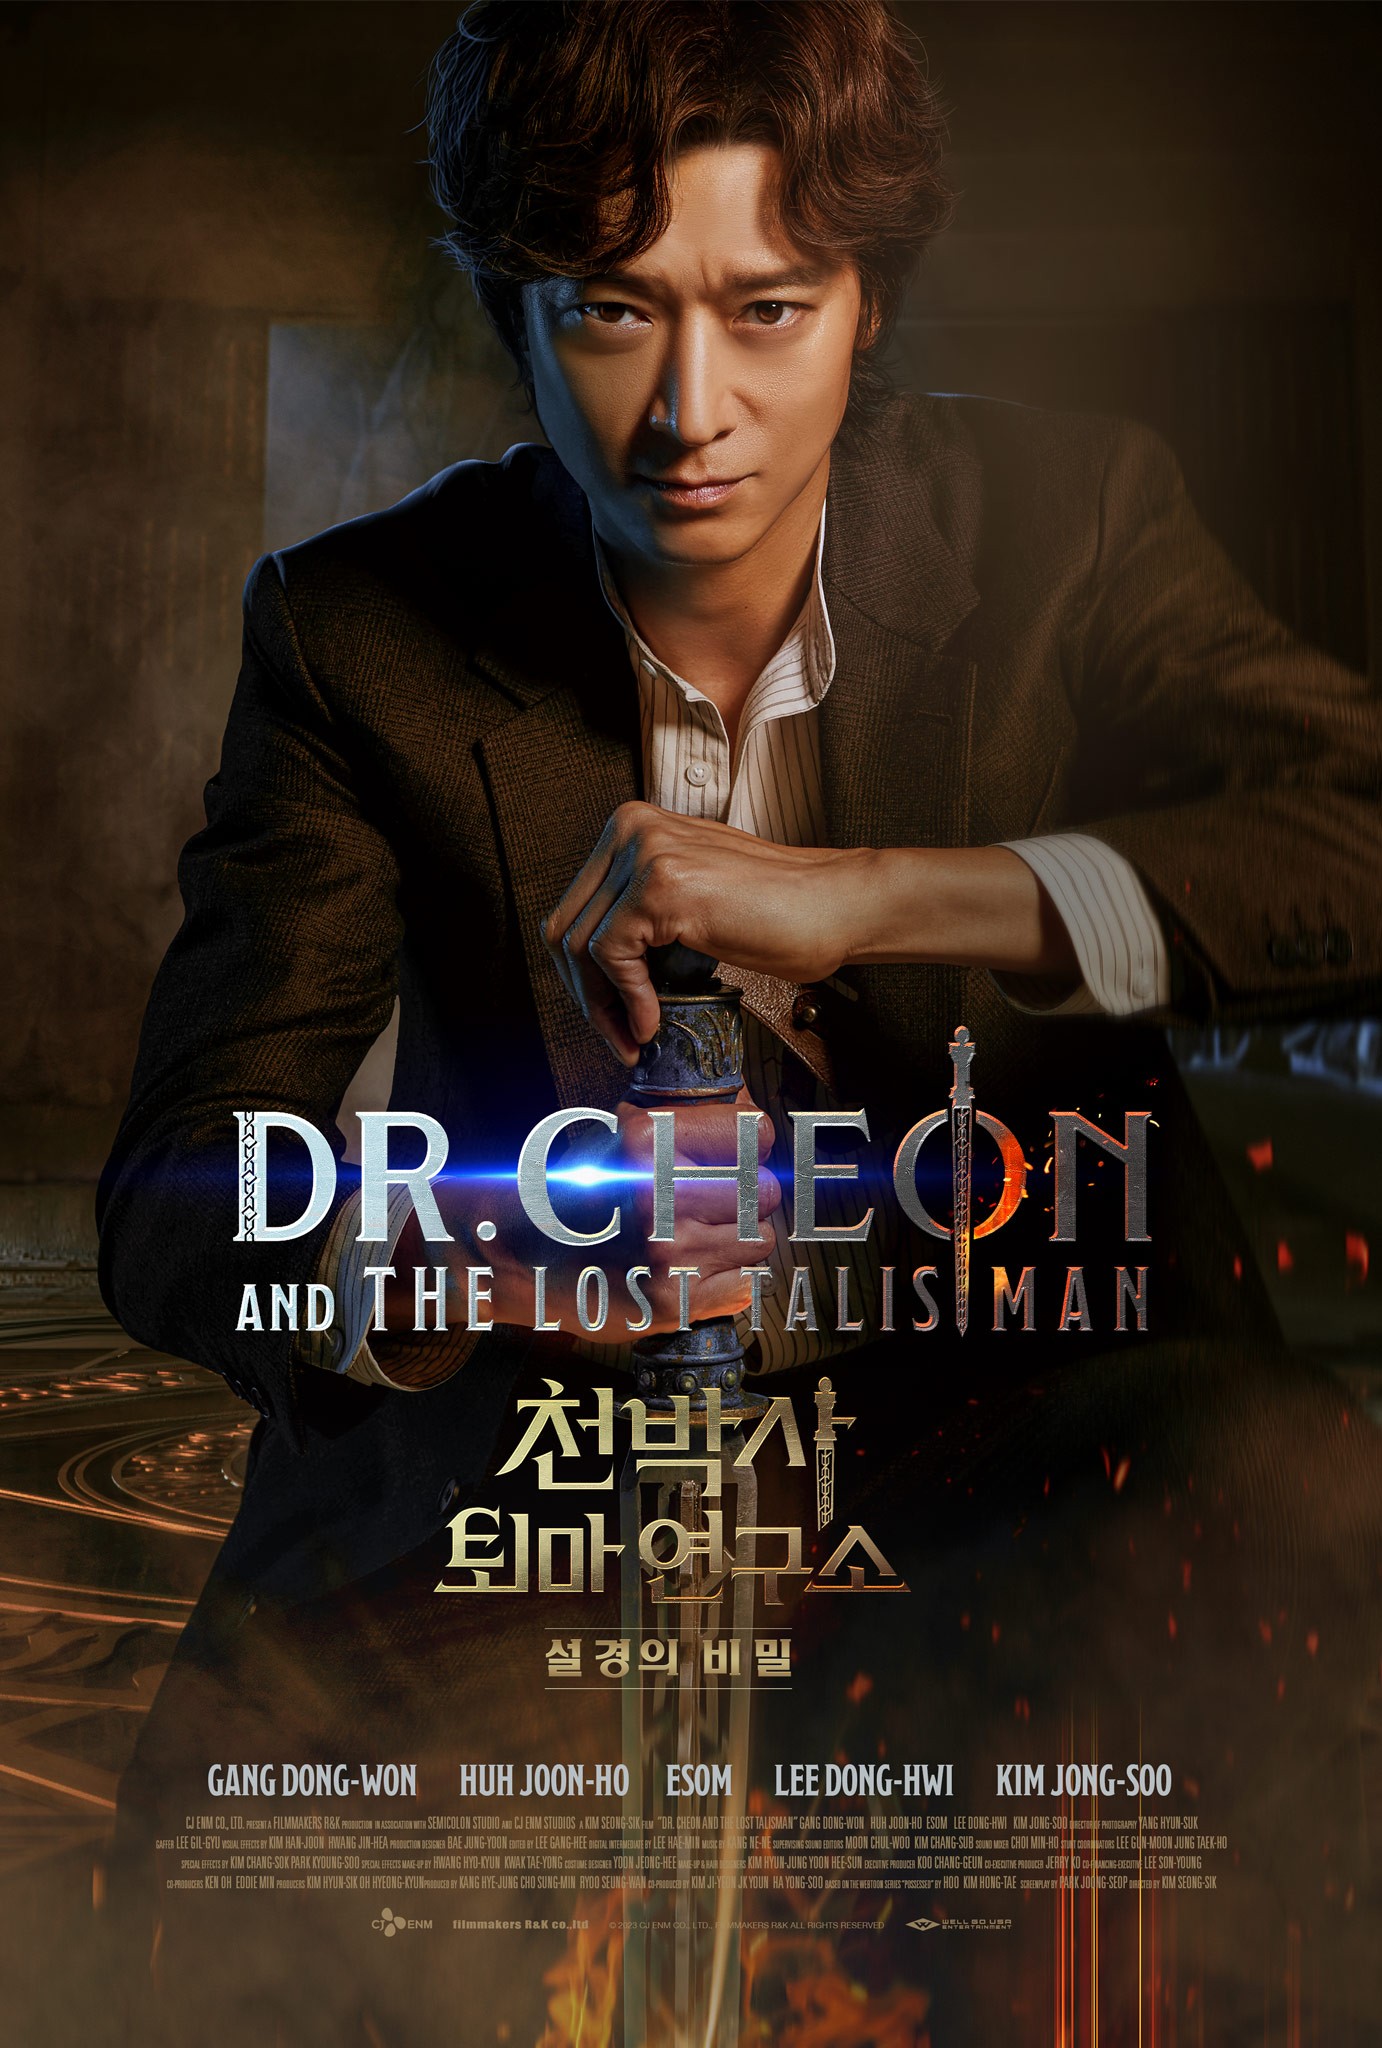 Dr. Cheon and the Lost Talisman Rotten Tomatoes